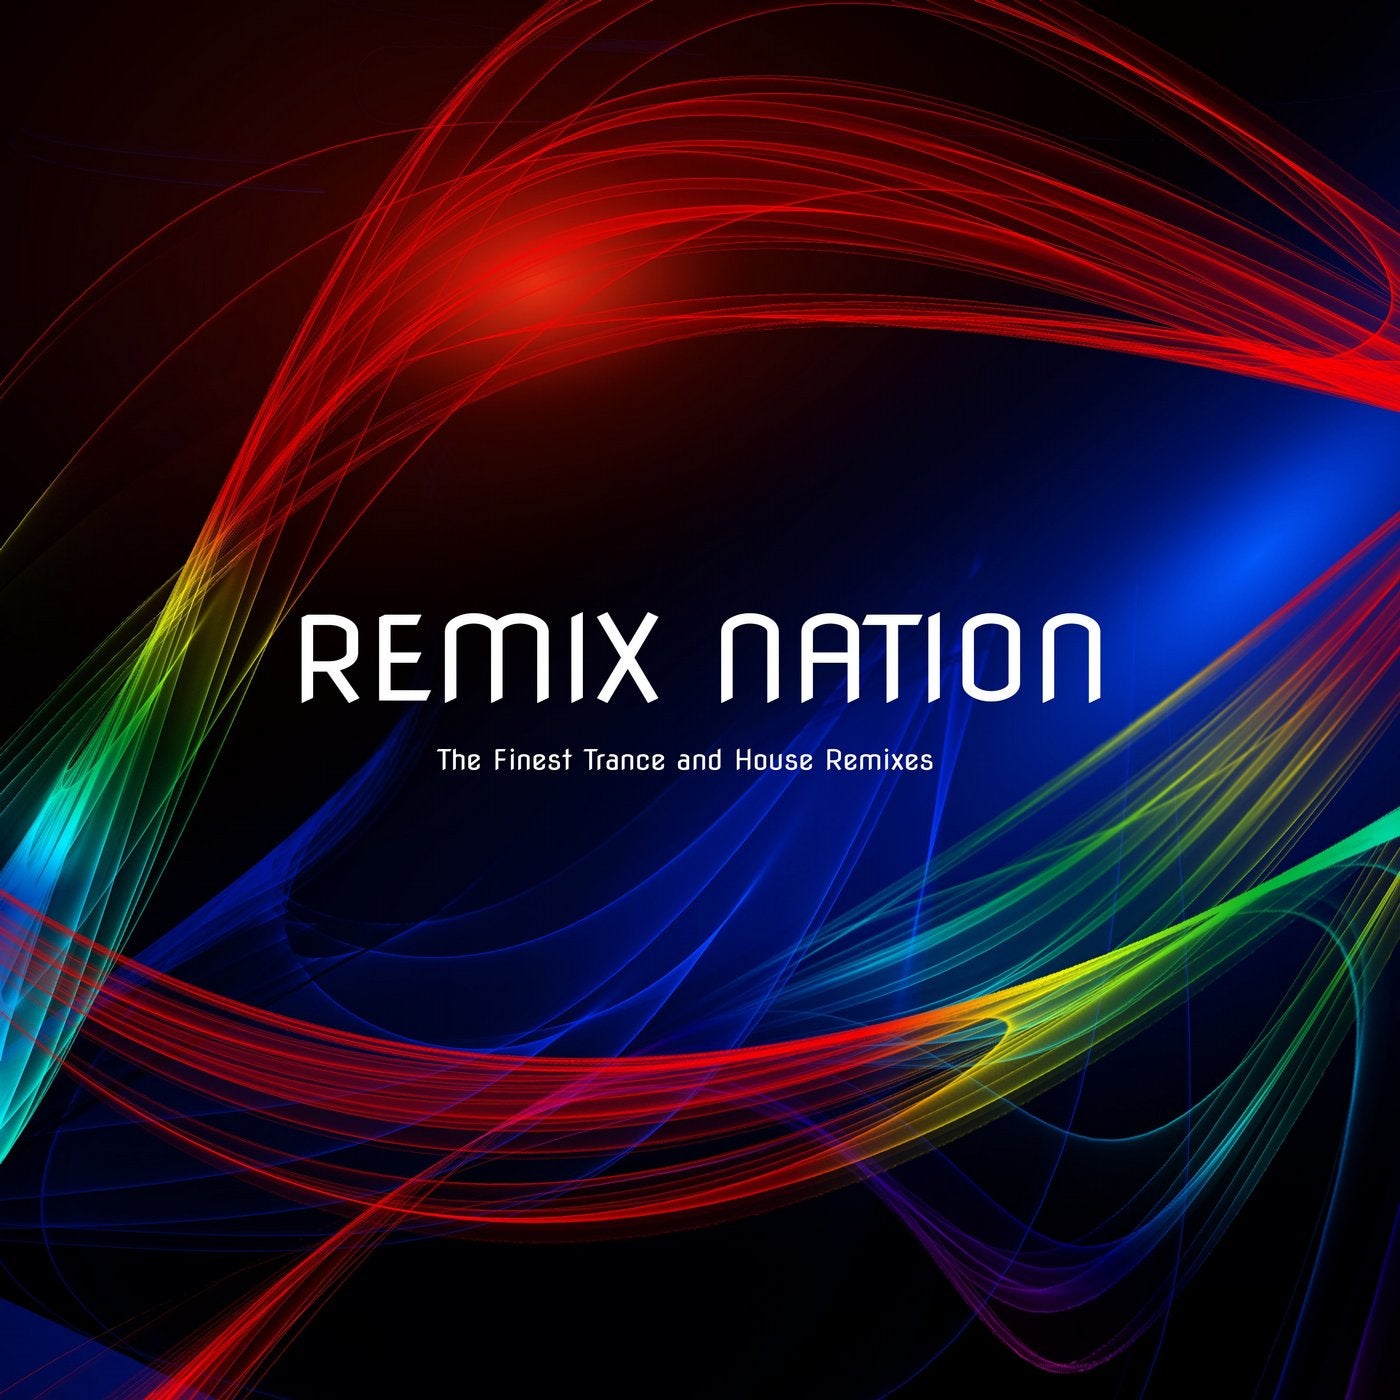 Remix Nation (The Finest Trance and House Remixes)